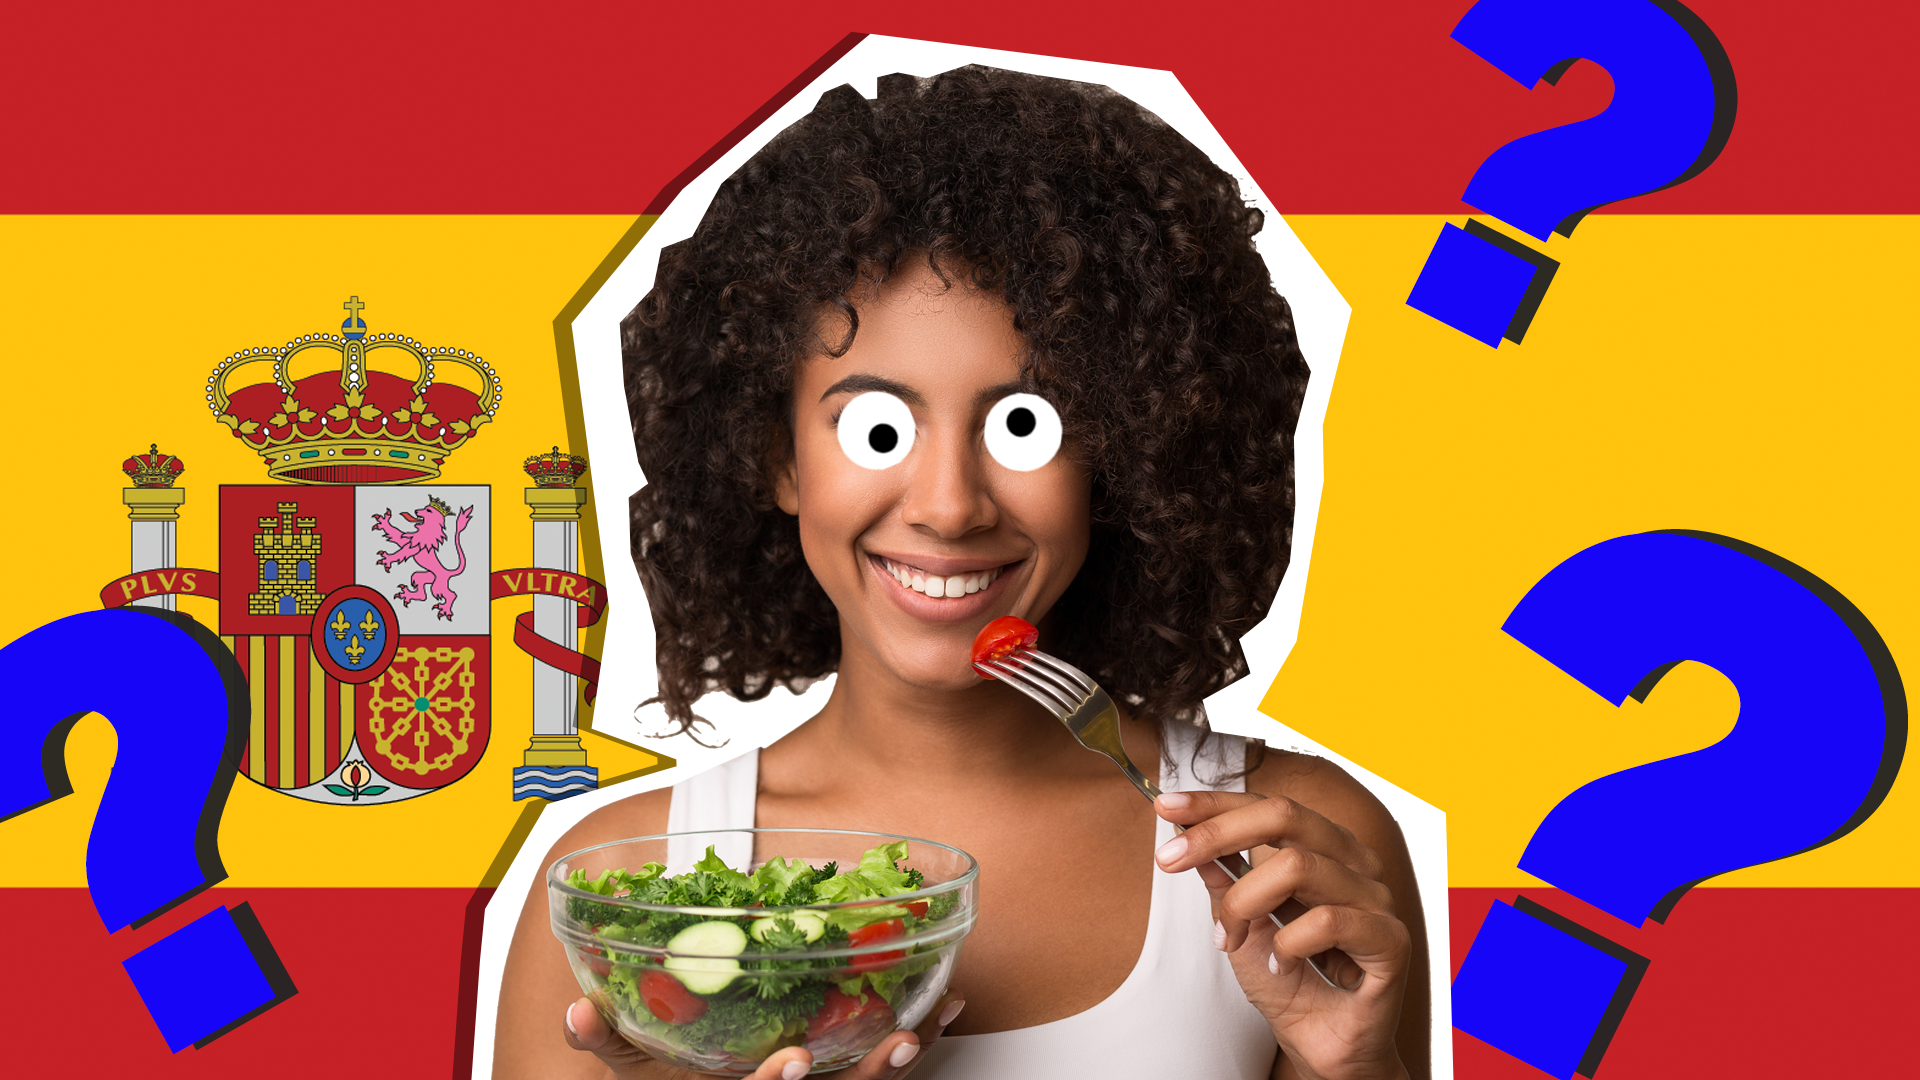 Woman eating in front of Spanish flag